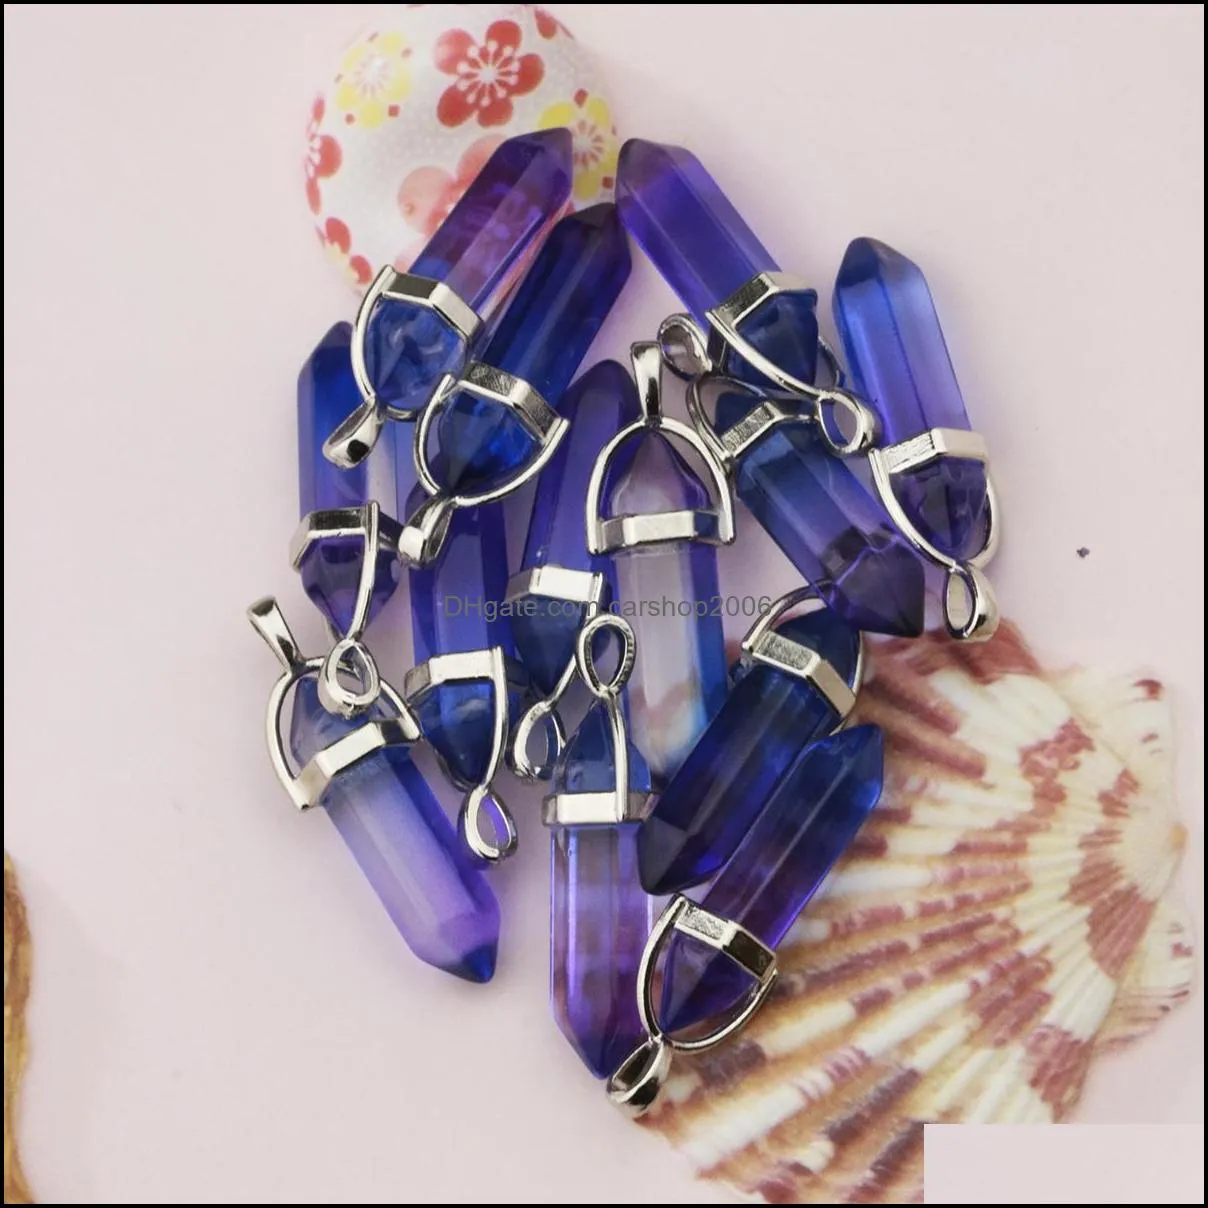 Colours glass Hexagon Prism Charms Pendants Crystal Pendants Clear Chakras Gem Stone fit earrings necklace making assorted